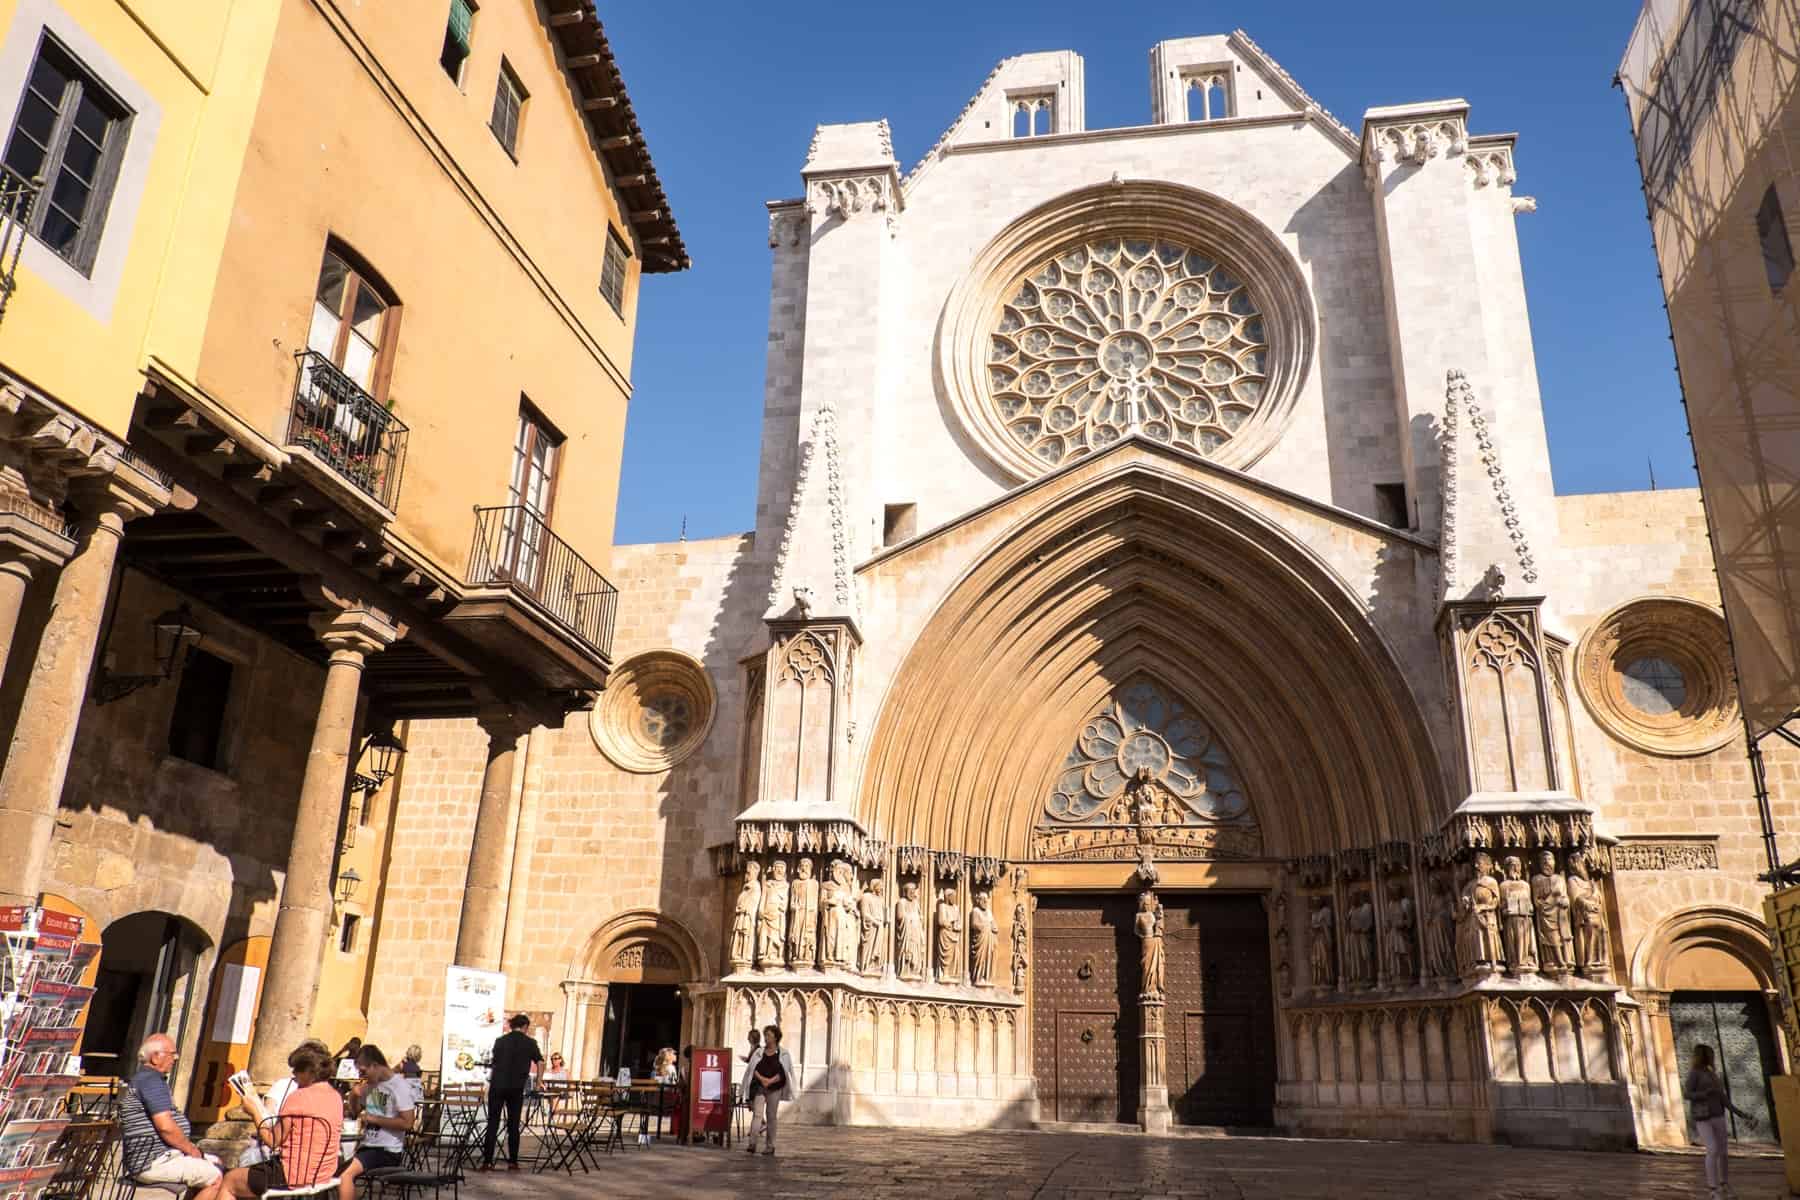 The white exterior of the Tarragona Cathedral of Tarragona on the site of the former Roman temple. On the left people are dining outside at a neighbouring restaurant